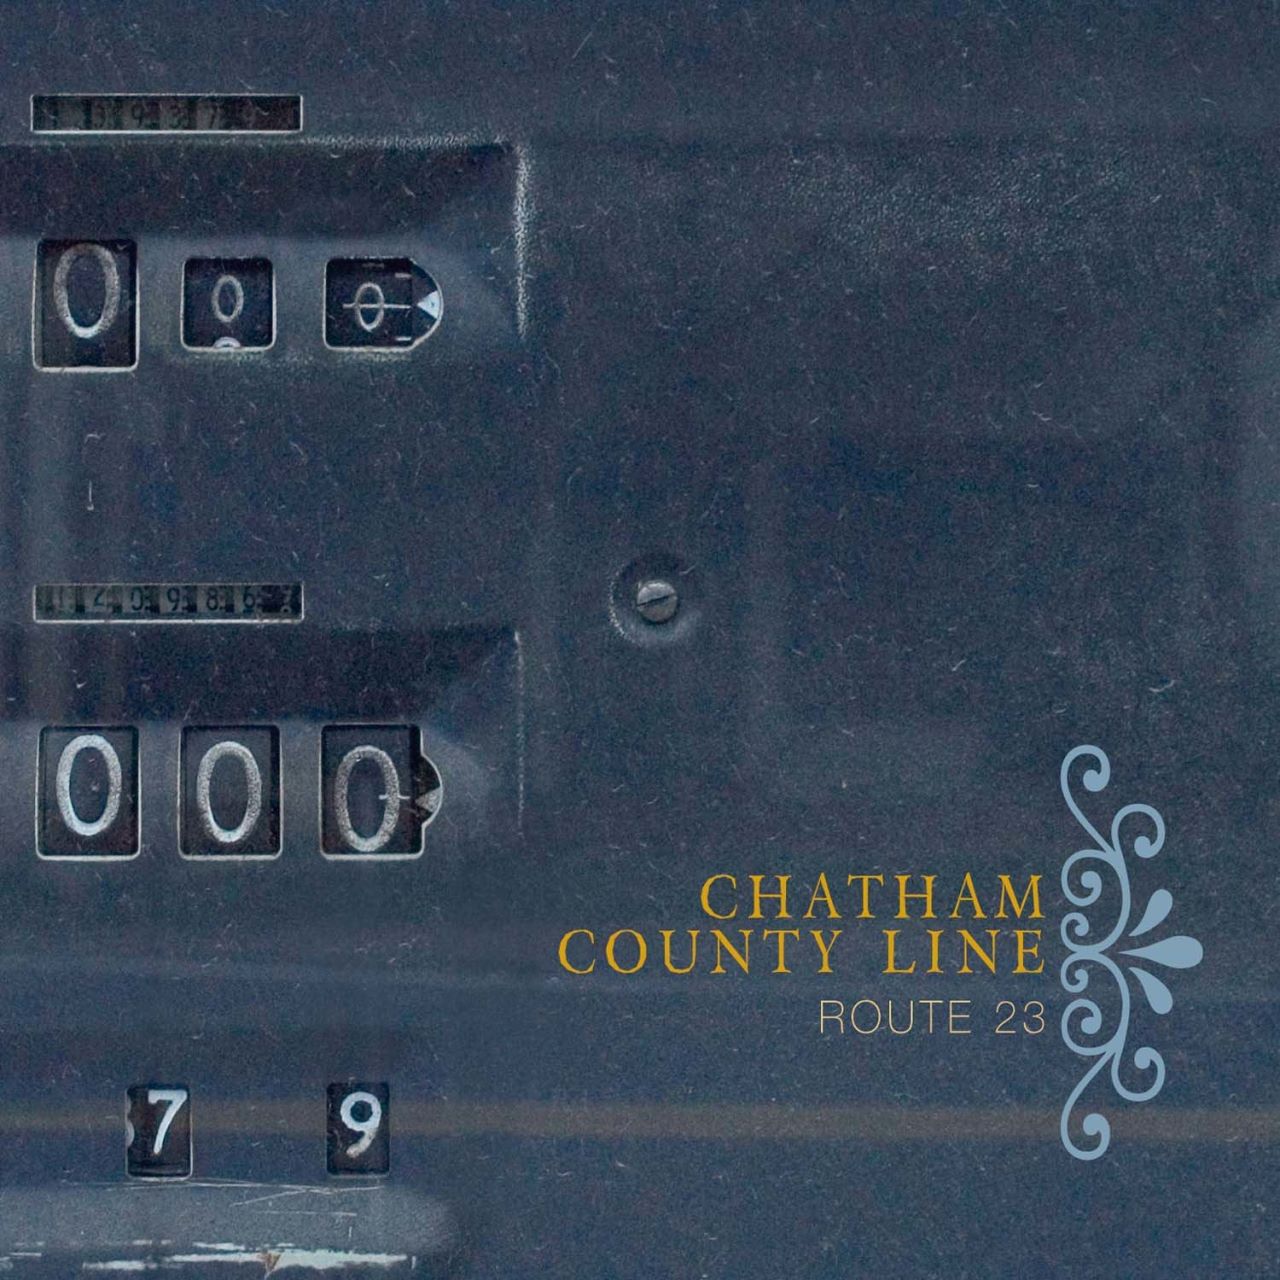 Chatham County Line - Route 23 cover album